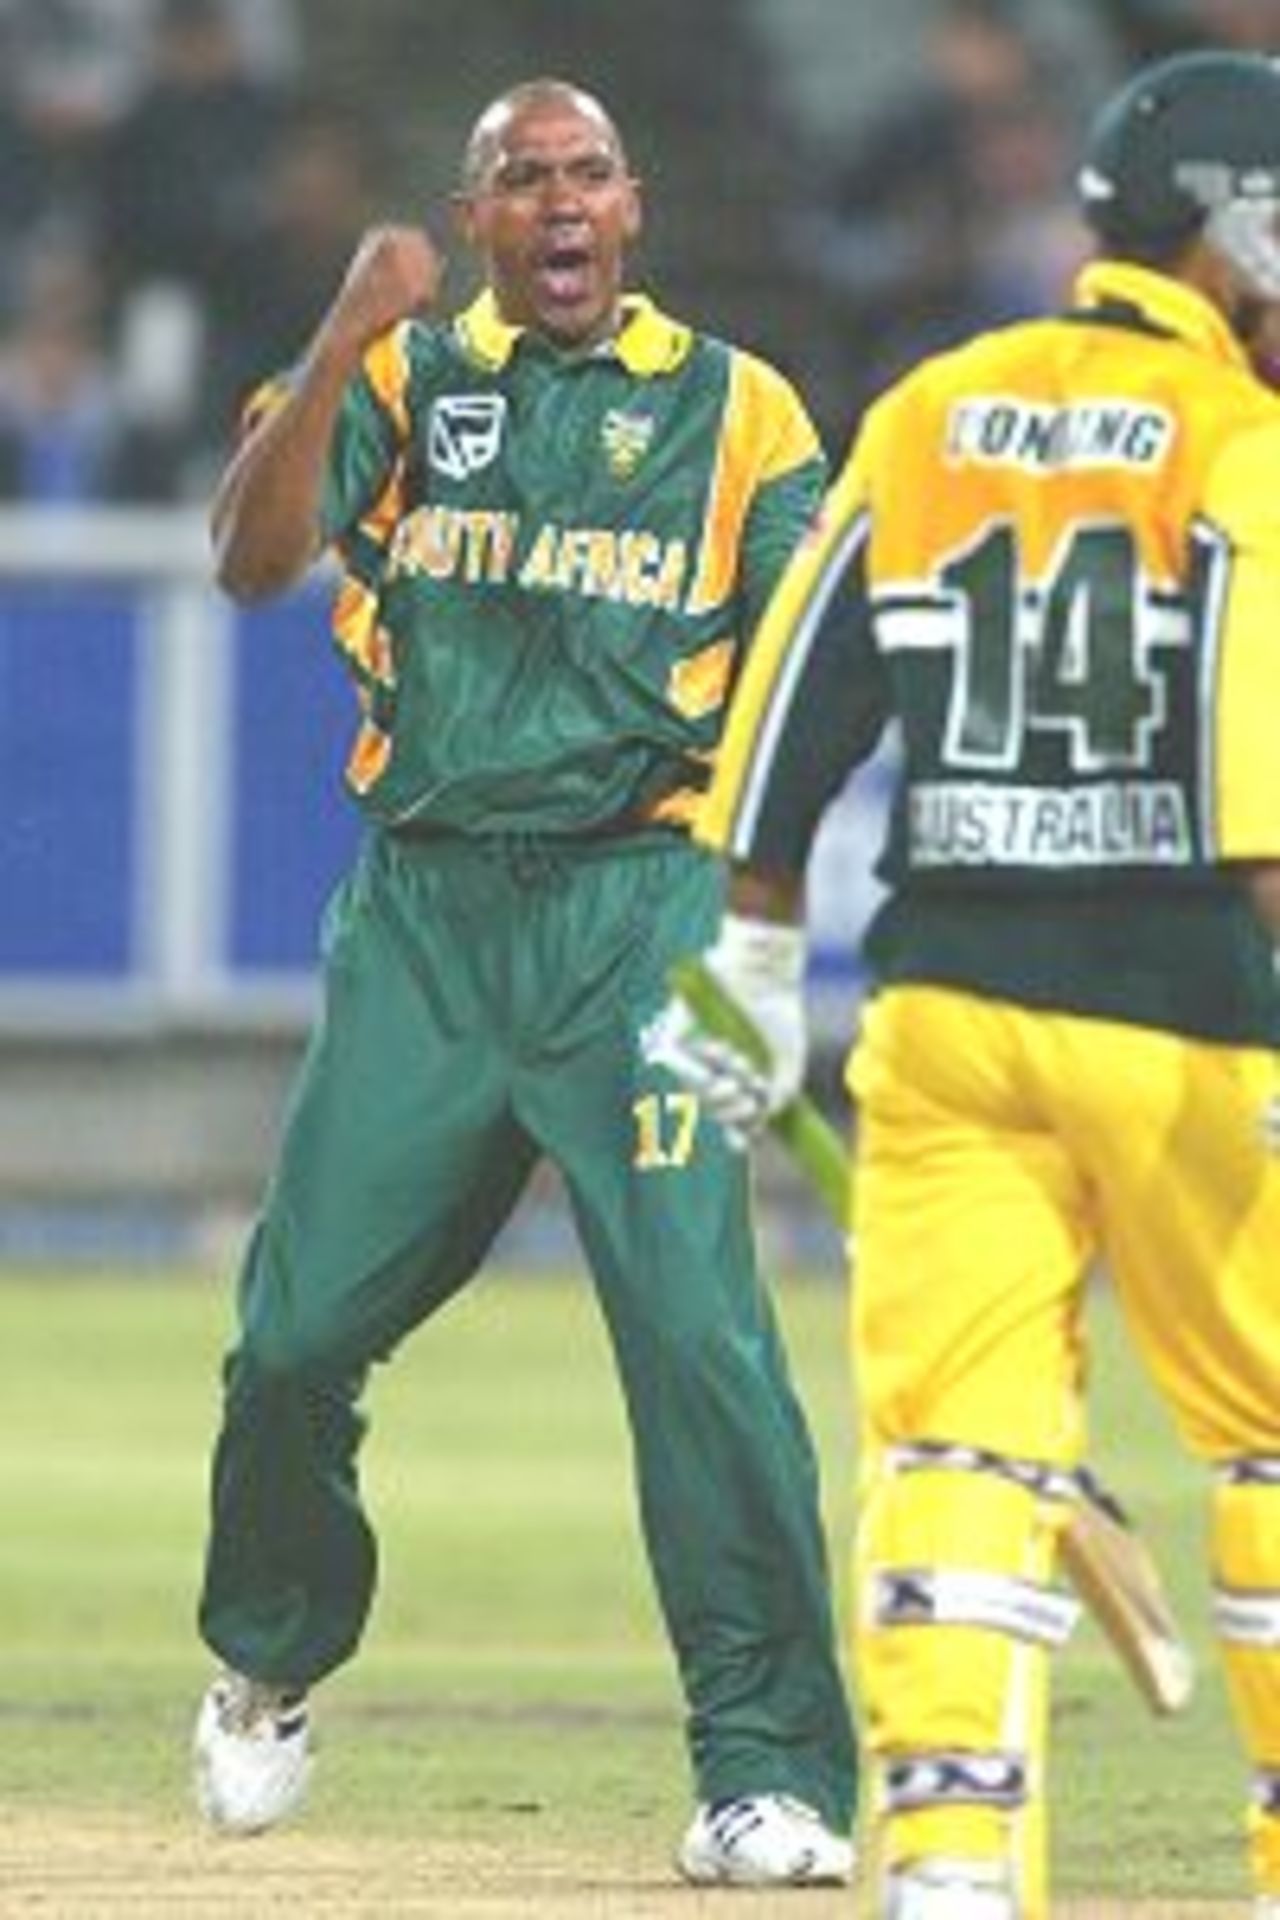 9 Apr 2002: Roger Telemachus gets the wicket of Ricky Ponting during the 7th ODI between South Africa v Australia played at Newlands, Cape Town, South Africa